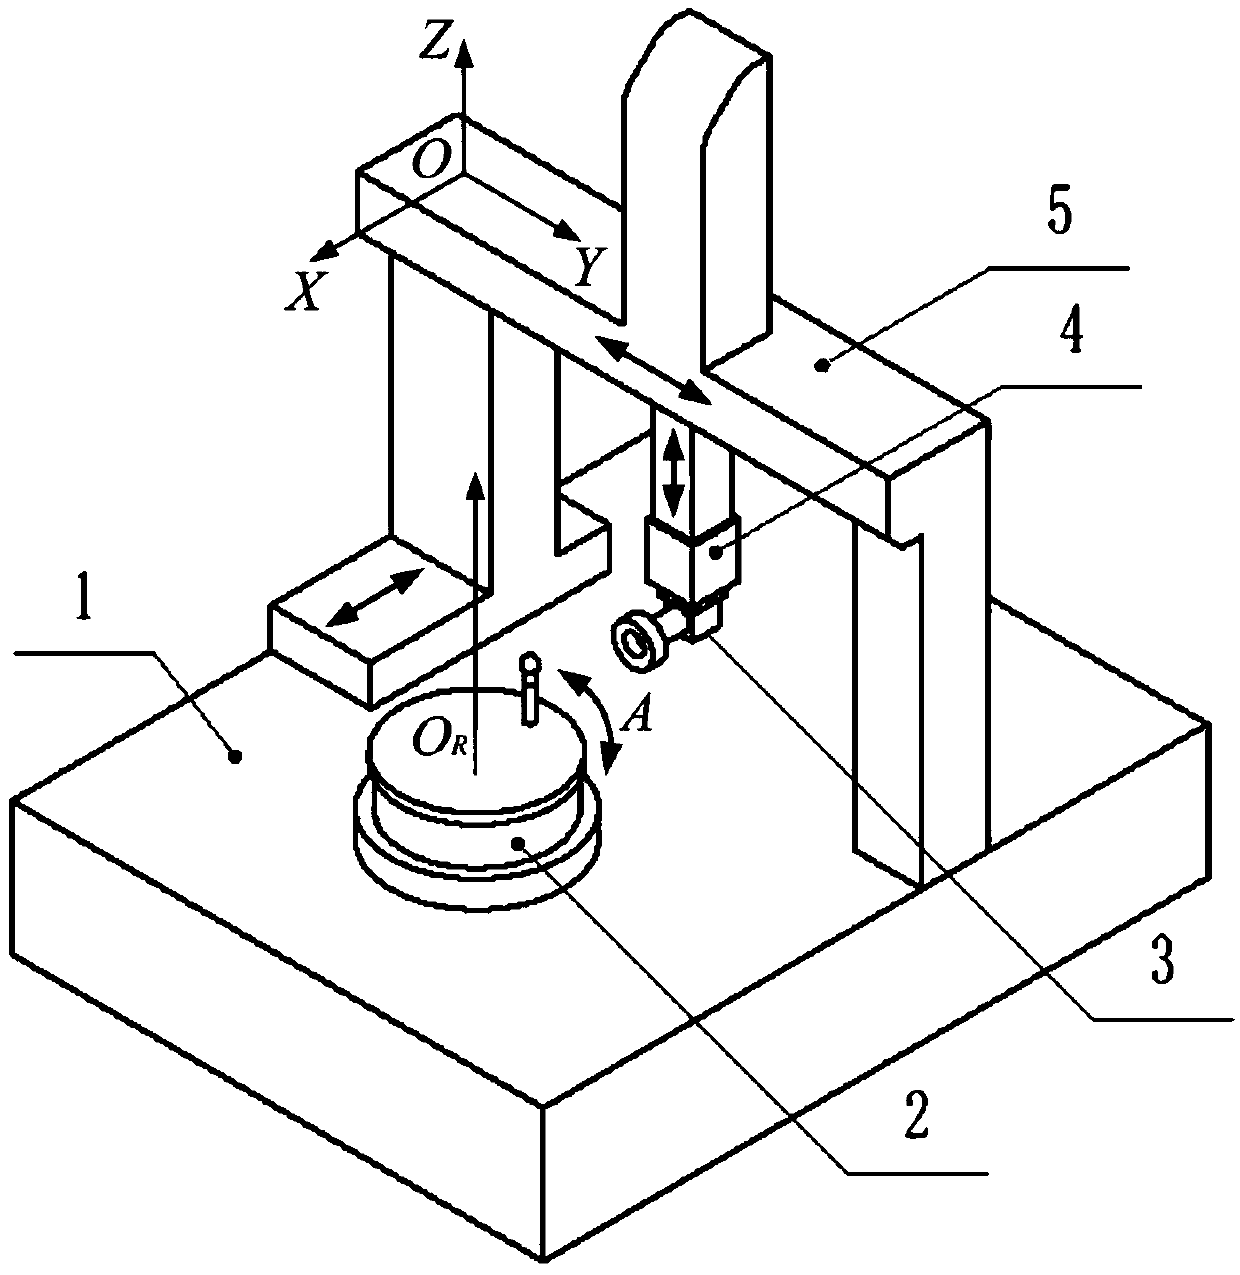 Method for calibrating origin position of center axis of rotary table based on visual measurement